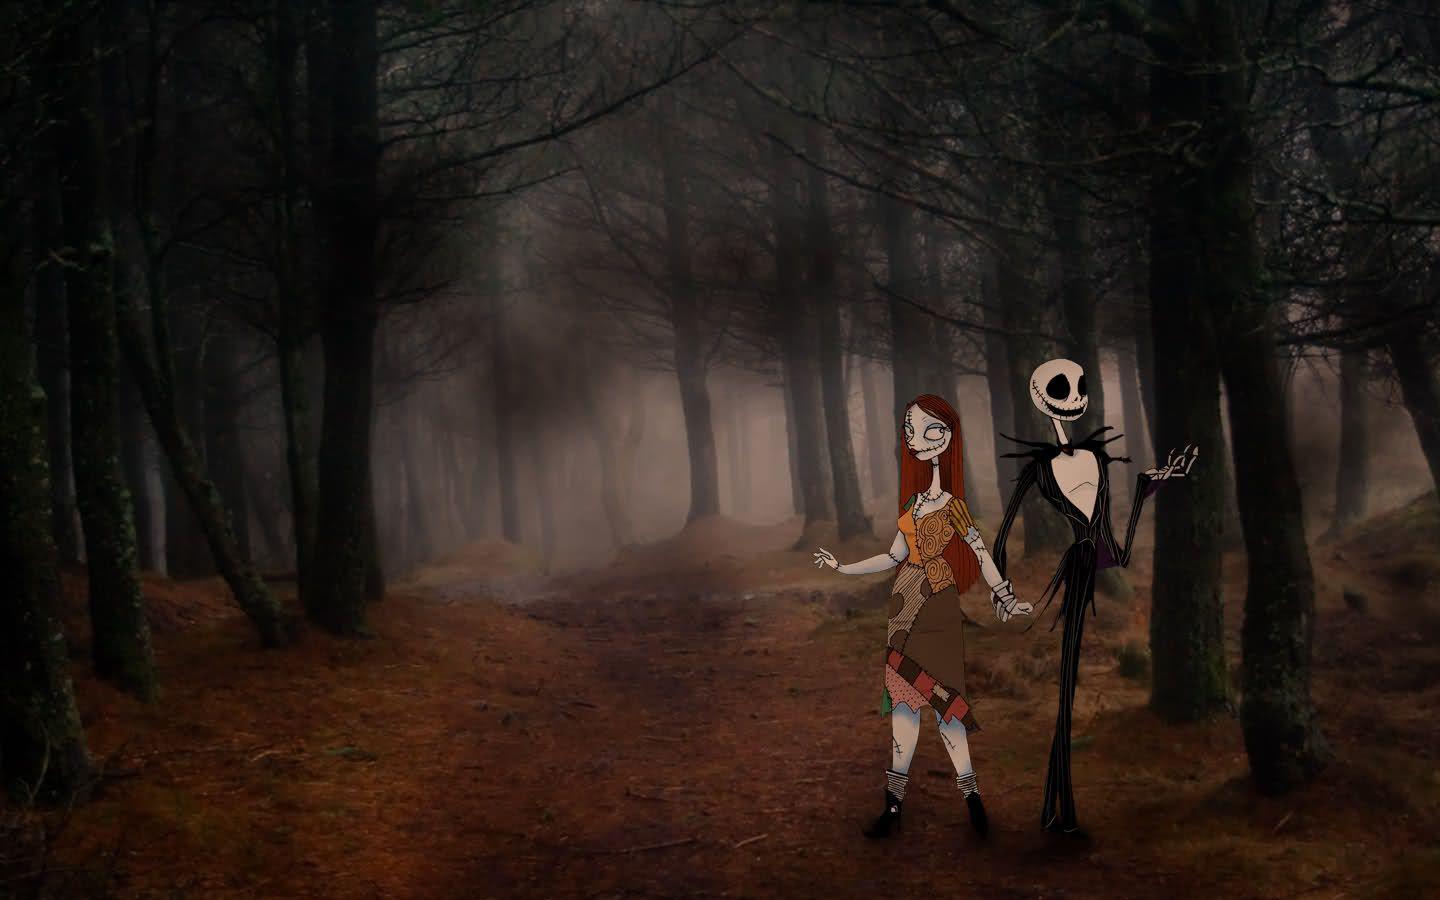 Jack and Sally Wallpapers - Top Free Jack and Sally Backgrounds